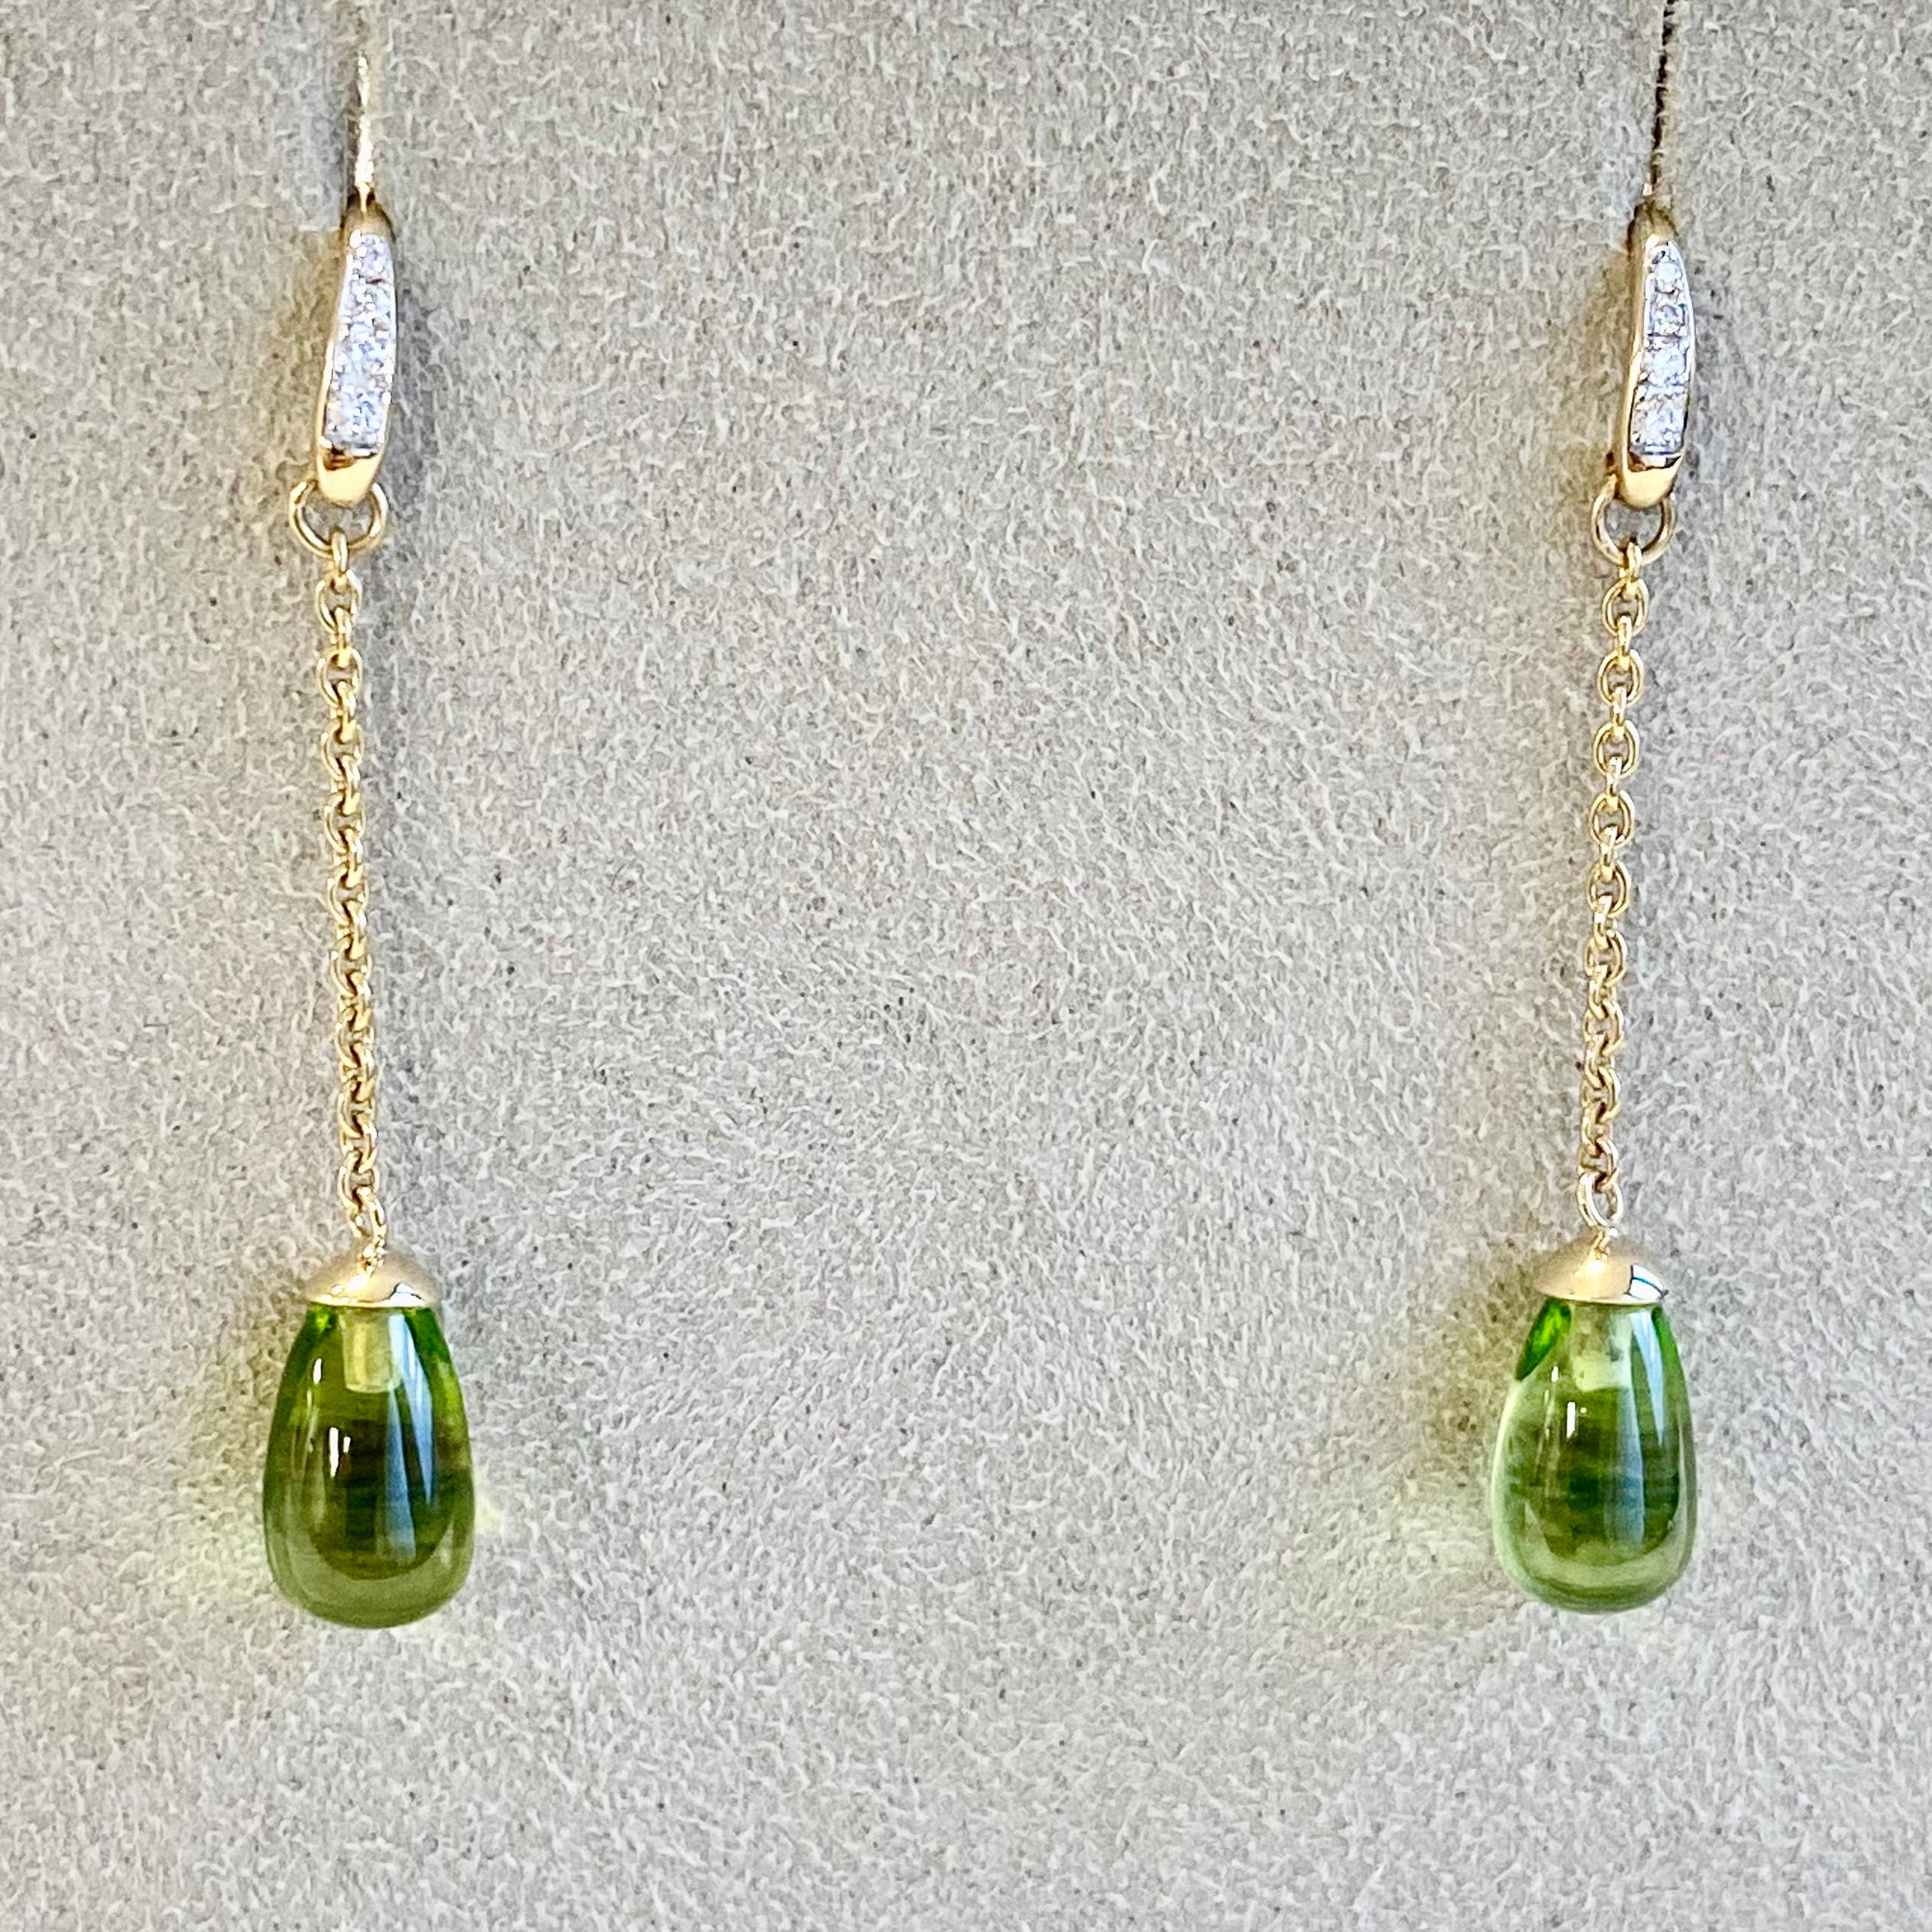 Created in 18 karat yellow gold
Peridot 6 carats approx.
Diamonds

About the Designers ~ Dharmesh & Namrata

Drawing inspiration from little things, Dharmesh & Namrata Kothari have created an extraordinary and refreshing collection of luxurious